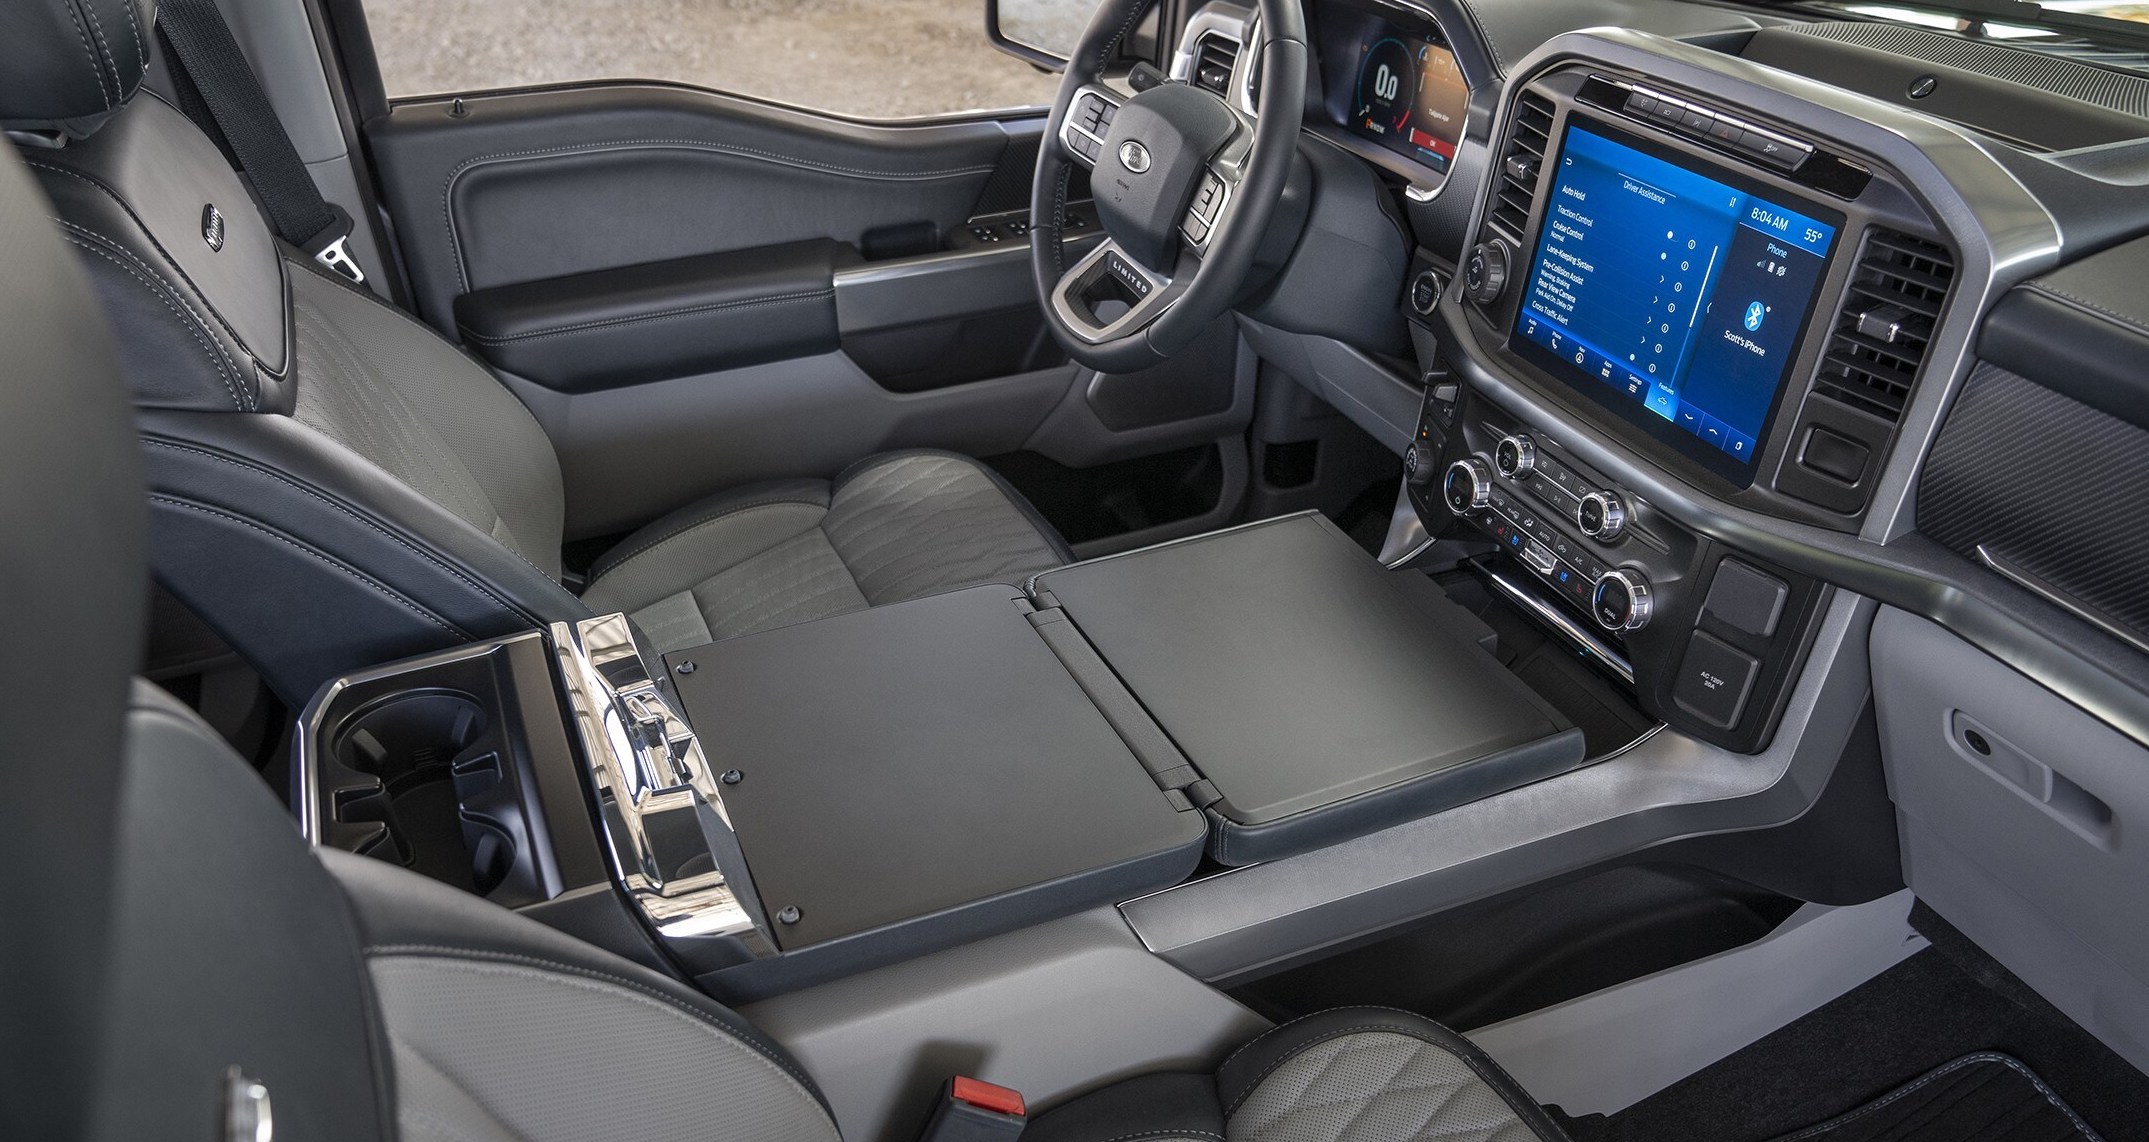 Advanced Ford F-150 Boasts an All-New SYNC 4 and its Host of Innovative Technology Features to Power Your Lifestyle